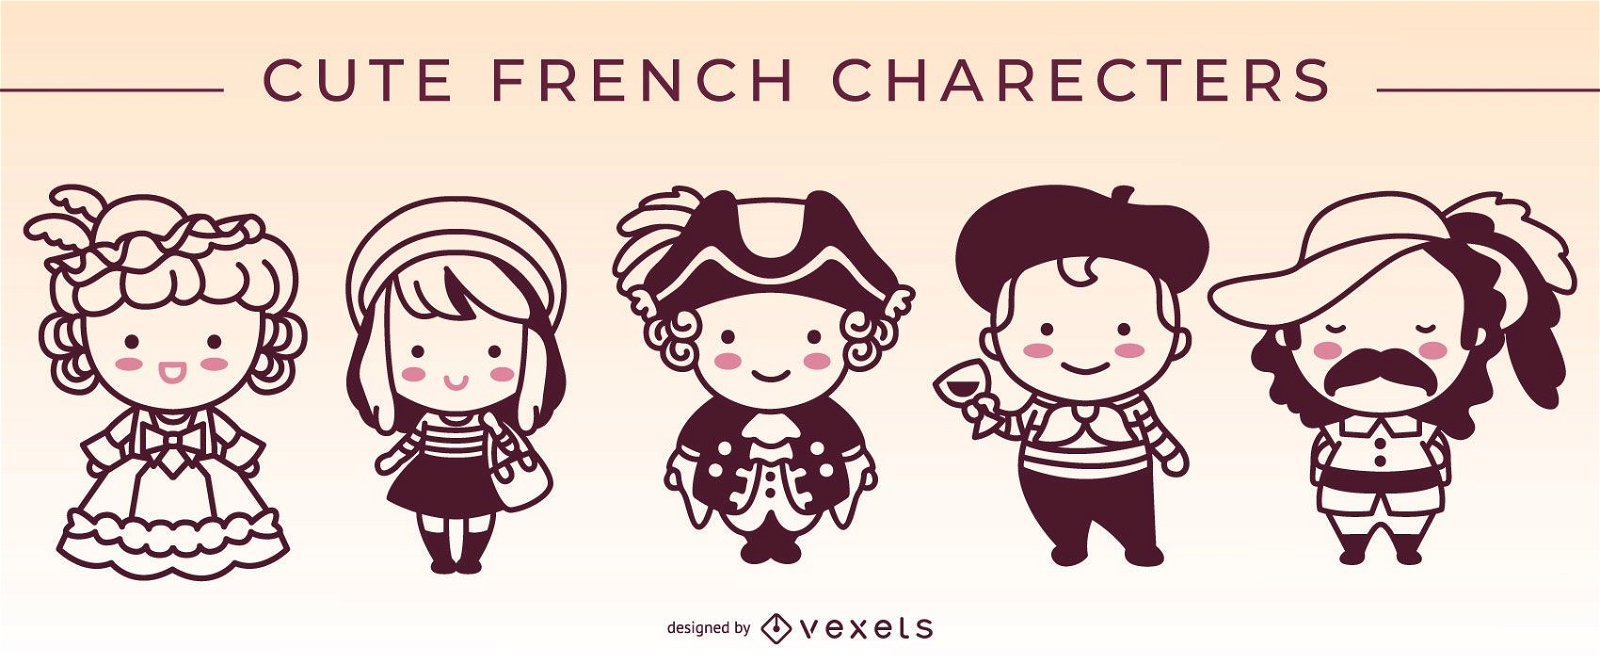 Cute french characters stroke set